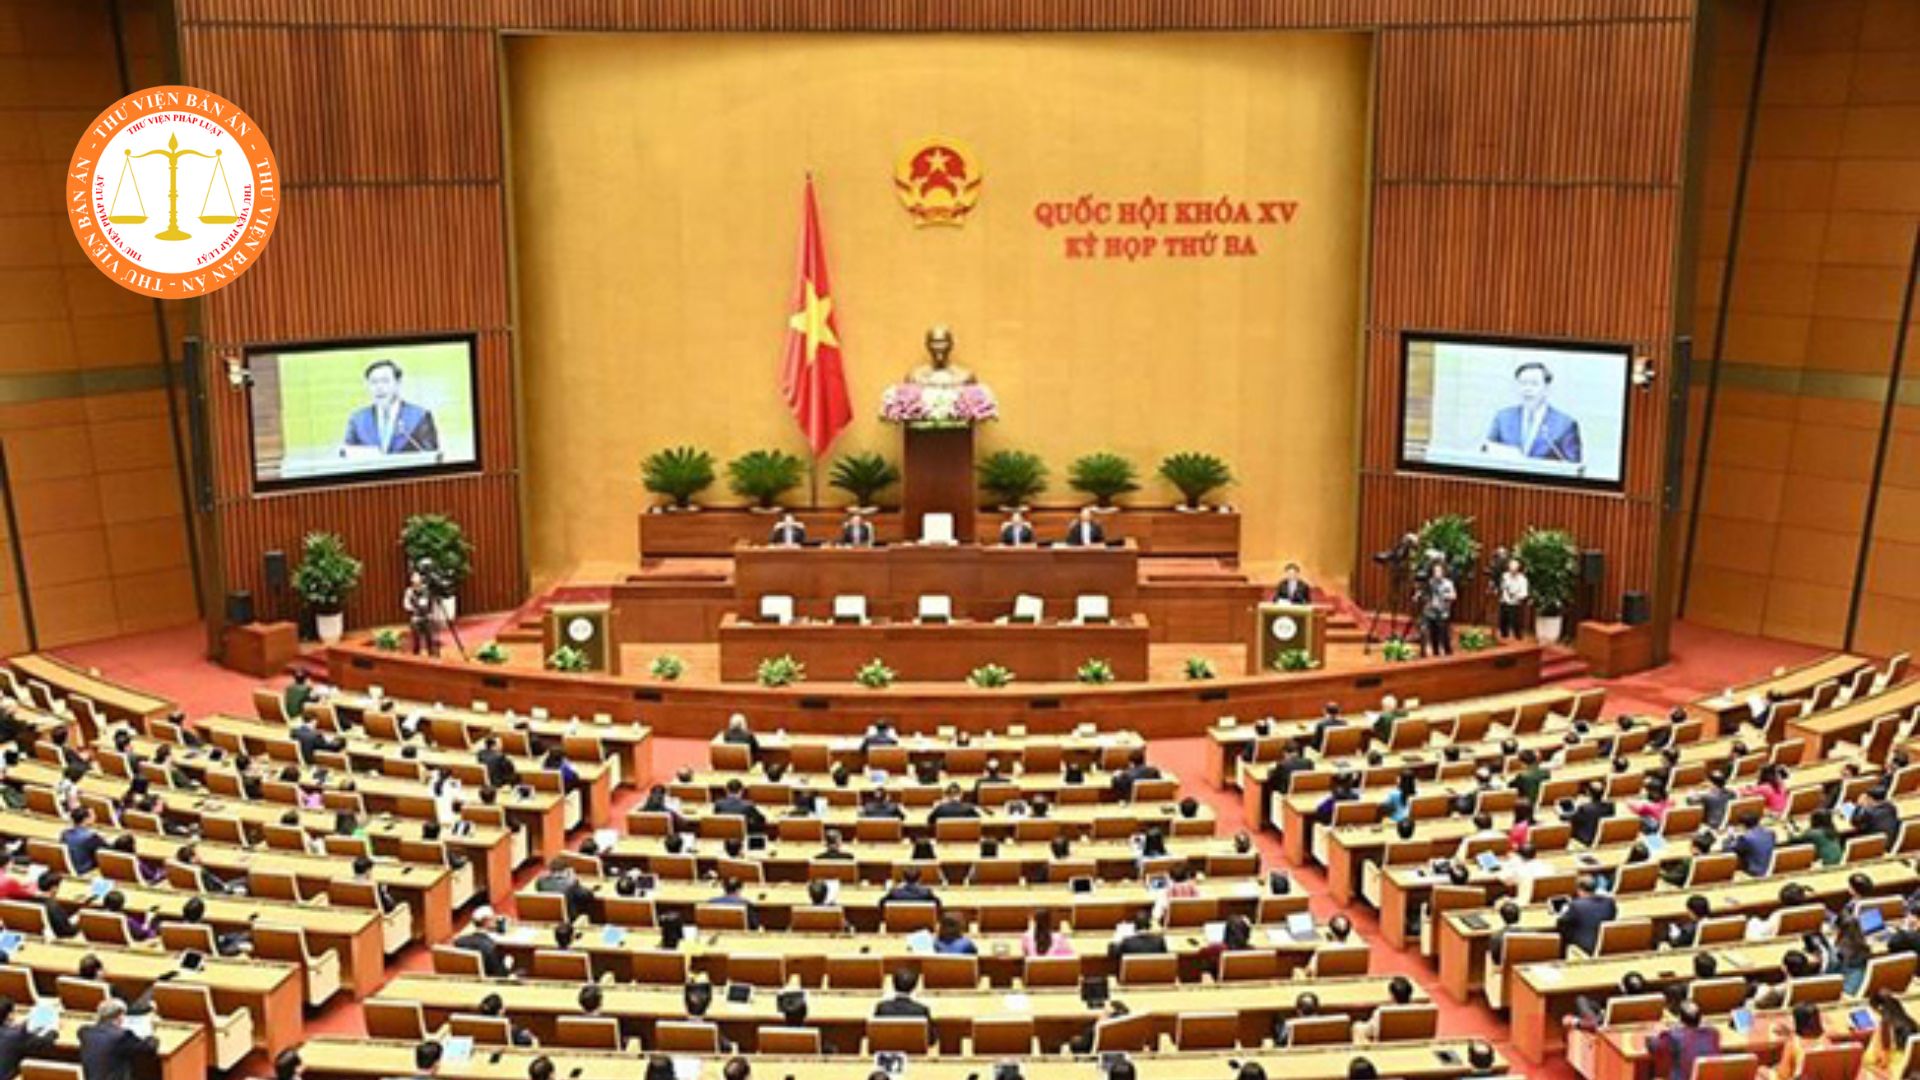 At the National Assembly session in Vietnam, to whom do National Assembly deputies have the right to raise questions?